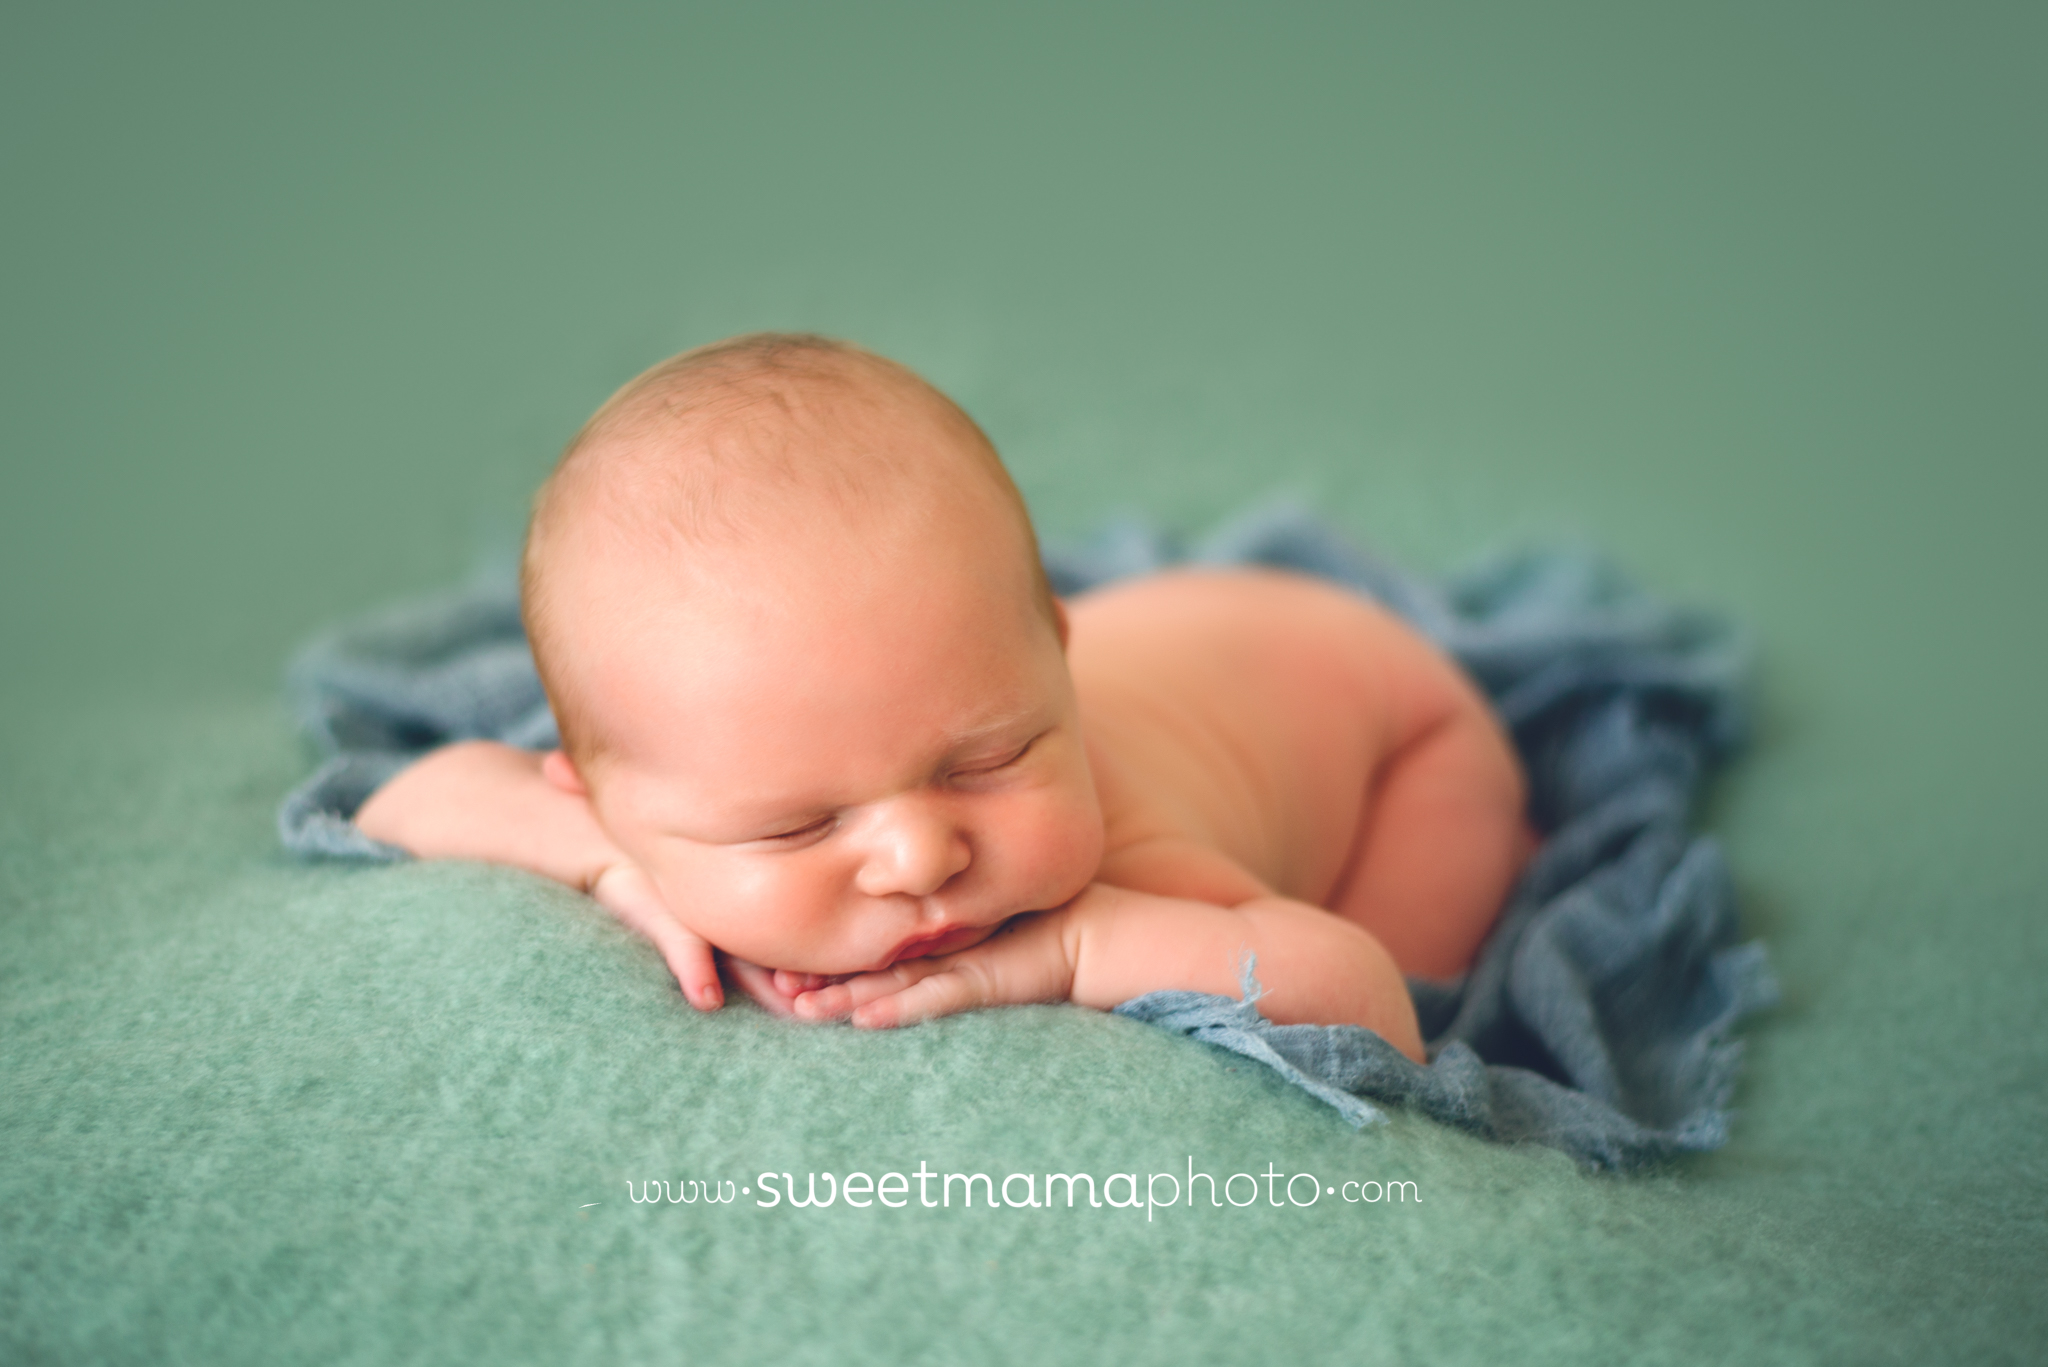 High-end Newborn Portrait Photography by Sweetmama - Cyprus photography boutique specializing in newborn, children, family, and maternity photography